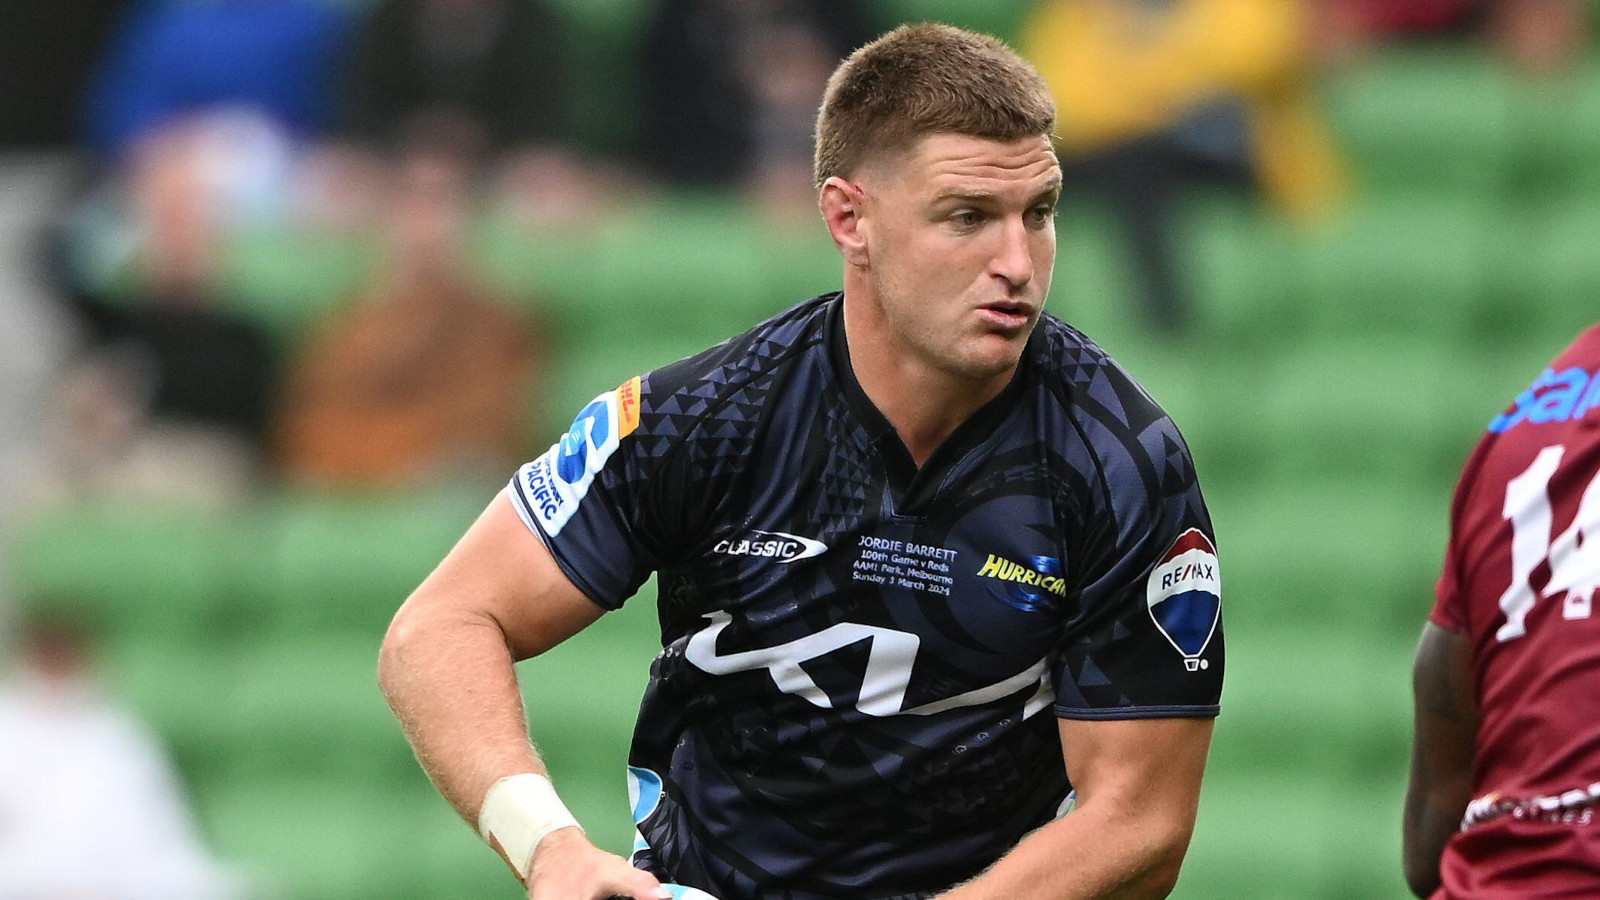 leinster-bound jordie barrett at the centre of another hurricanes win as unbeaten run continues